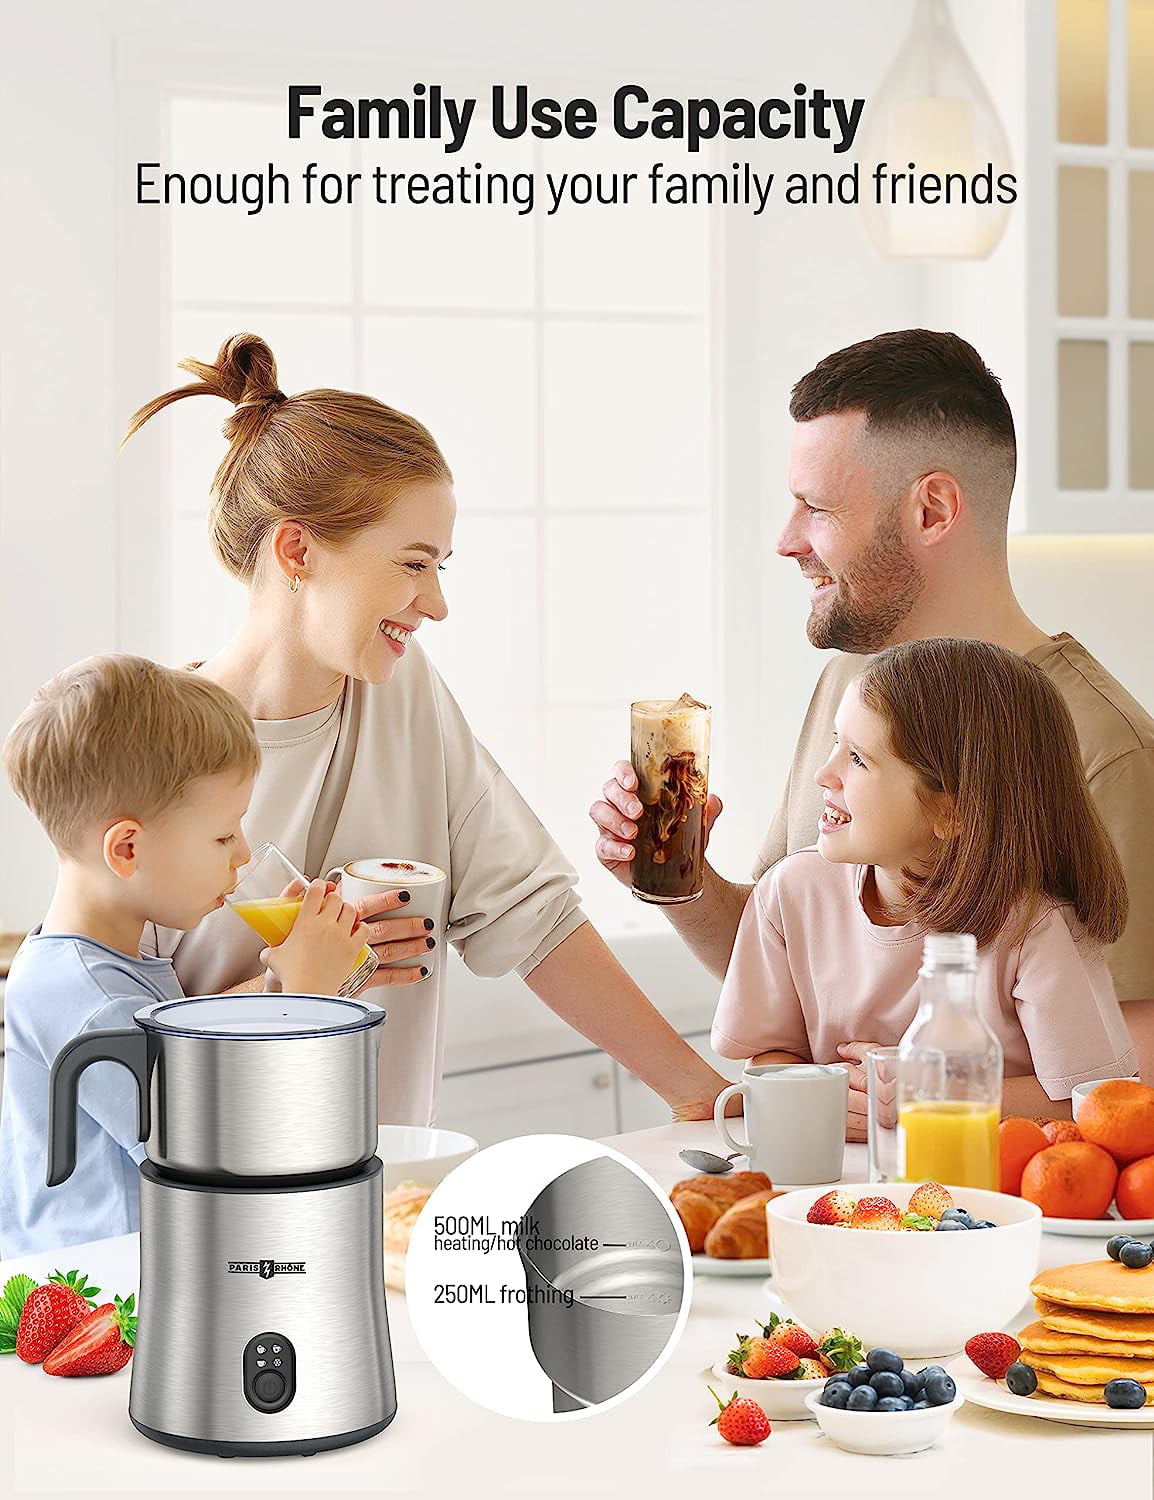  Milk Frother and Steamer, 500ML Detachable Milk Steamer,  Symdral 4 in 1 Milk Frother Electric with Hot & Cold Foam, Milk Warmer, Hot  Chocolate Maker, food-grade Stainless Steel, Dishwasher Safe: Home